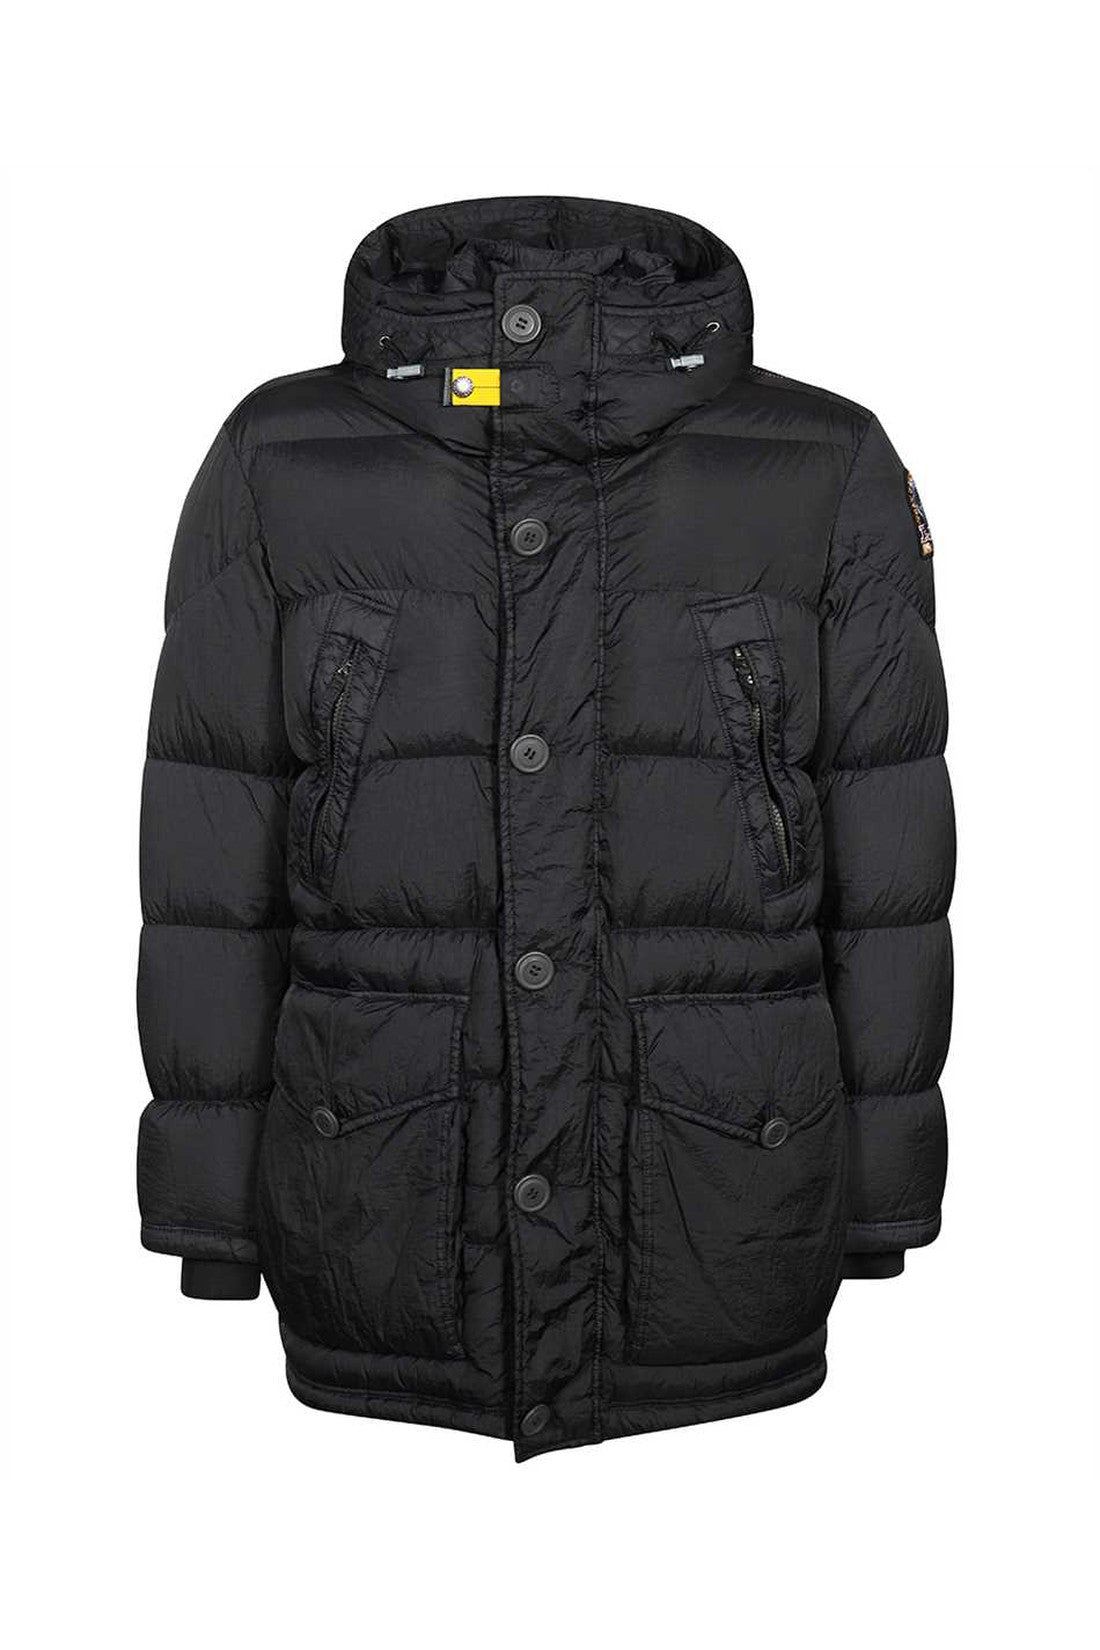 Hooded down jacket-Parajumpers-OUTLET-SALE-3XL-ARCHIVIST